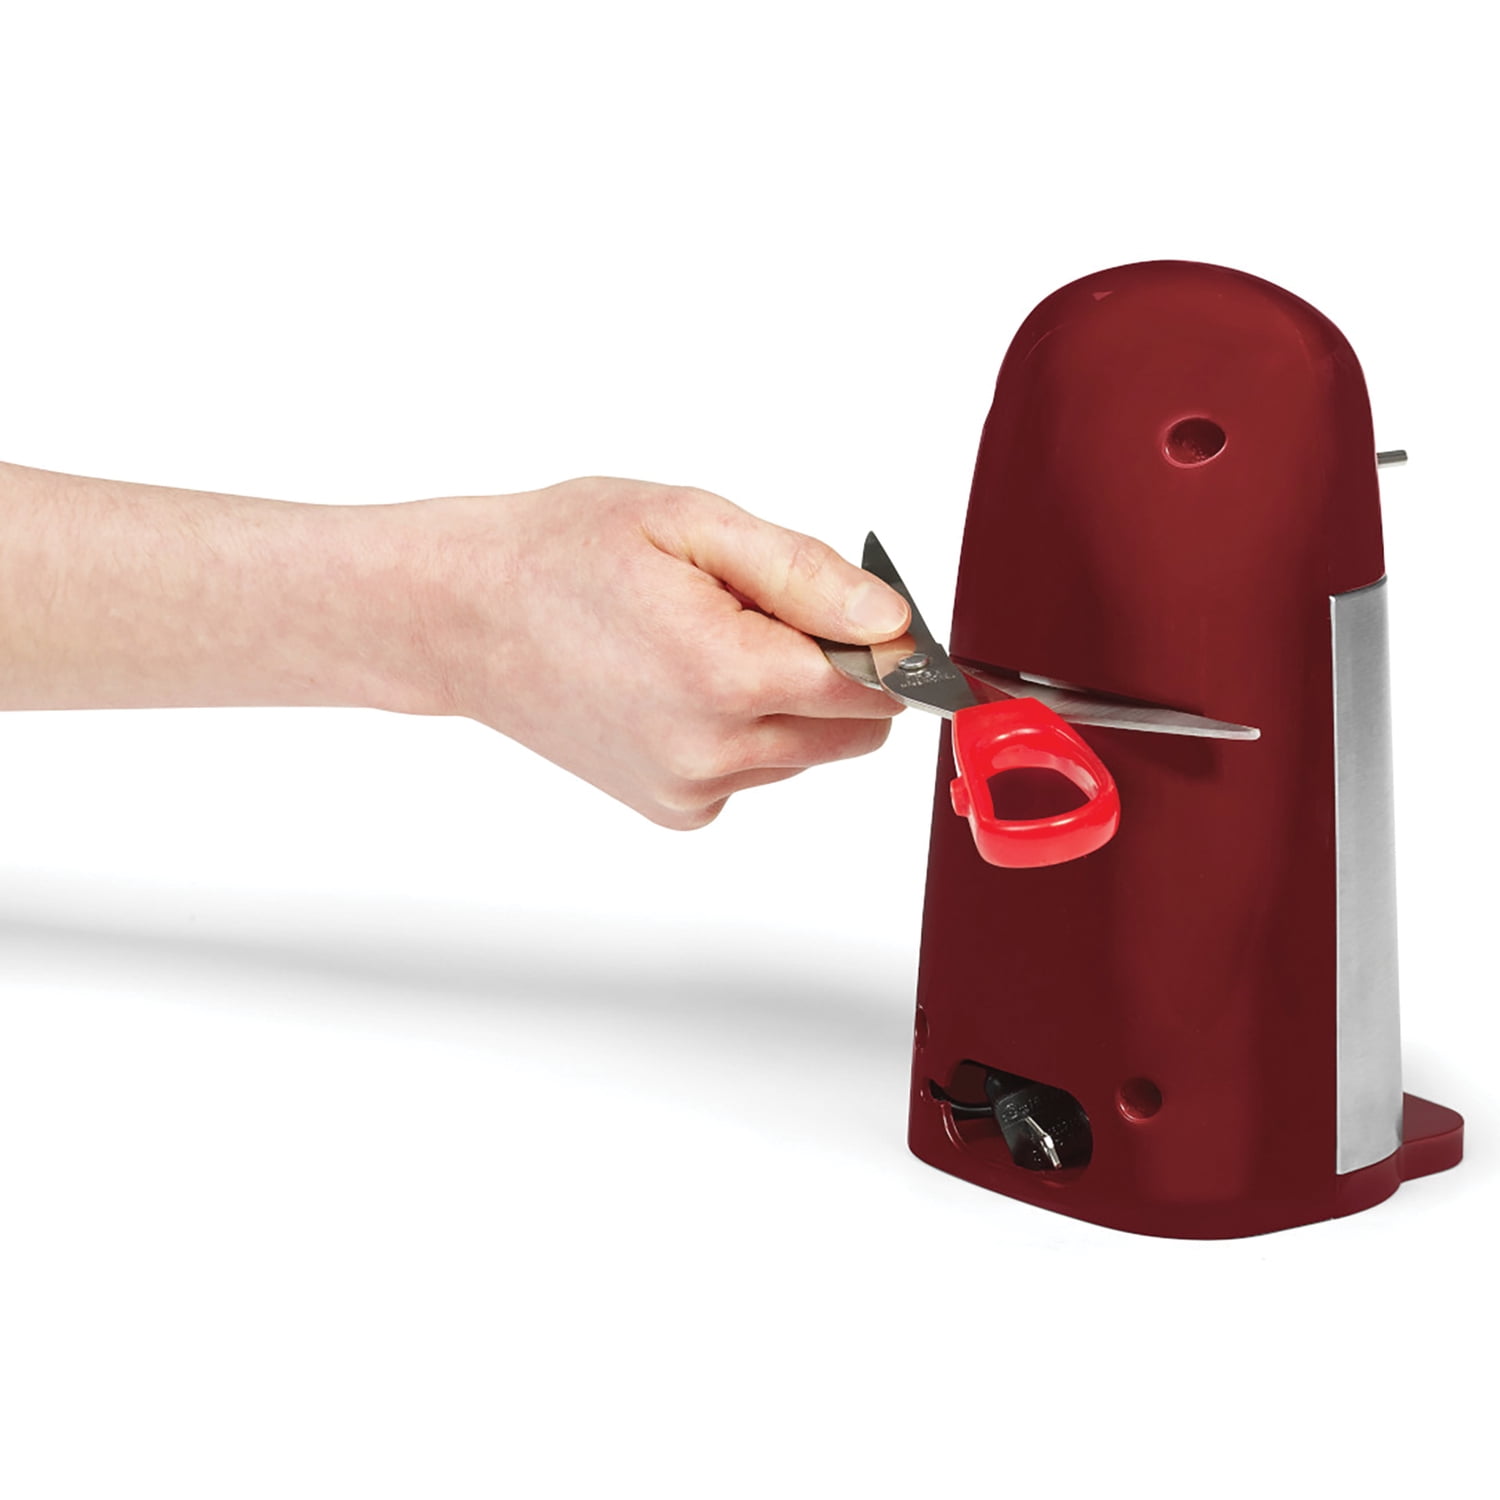  POHL SCHMITT Electric Can Opener, Knife Sharpener and